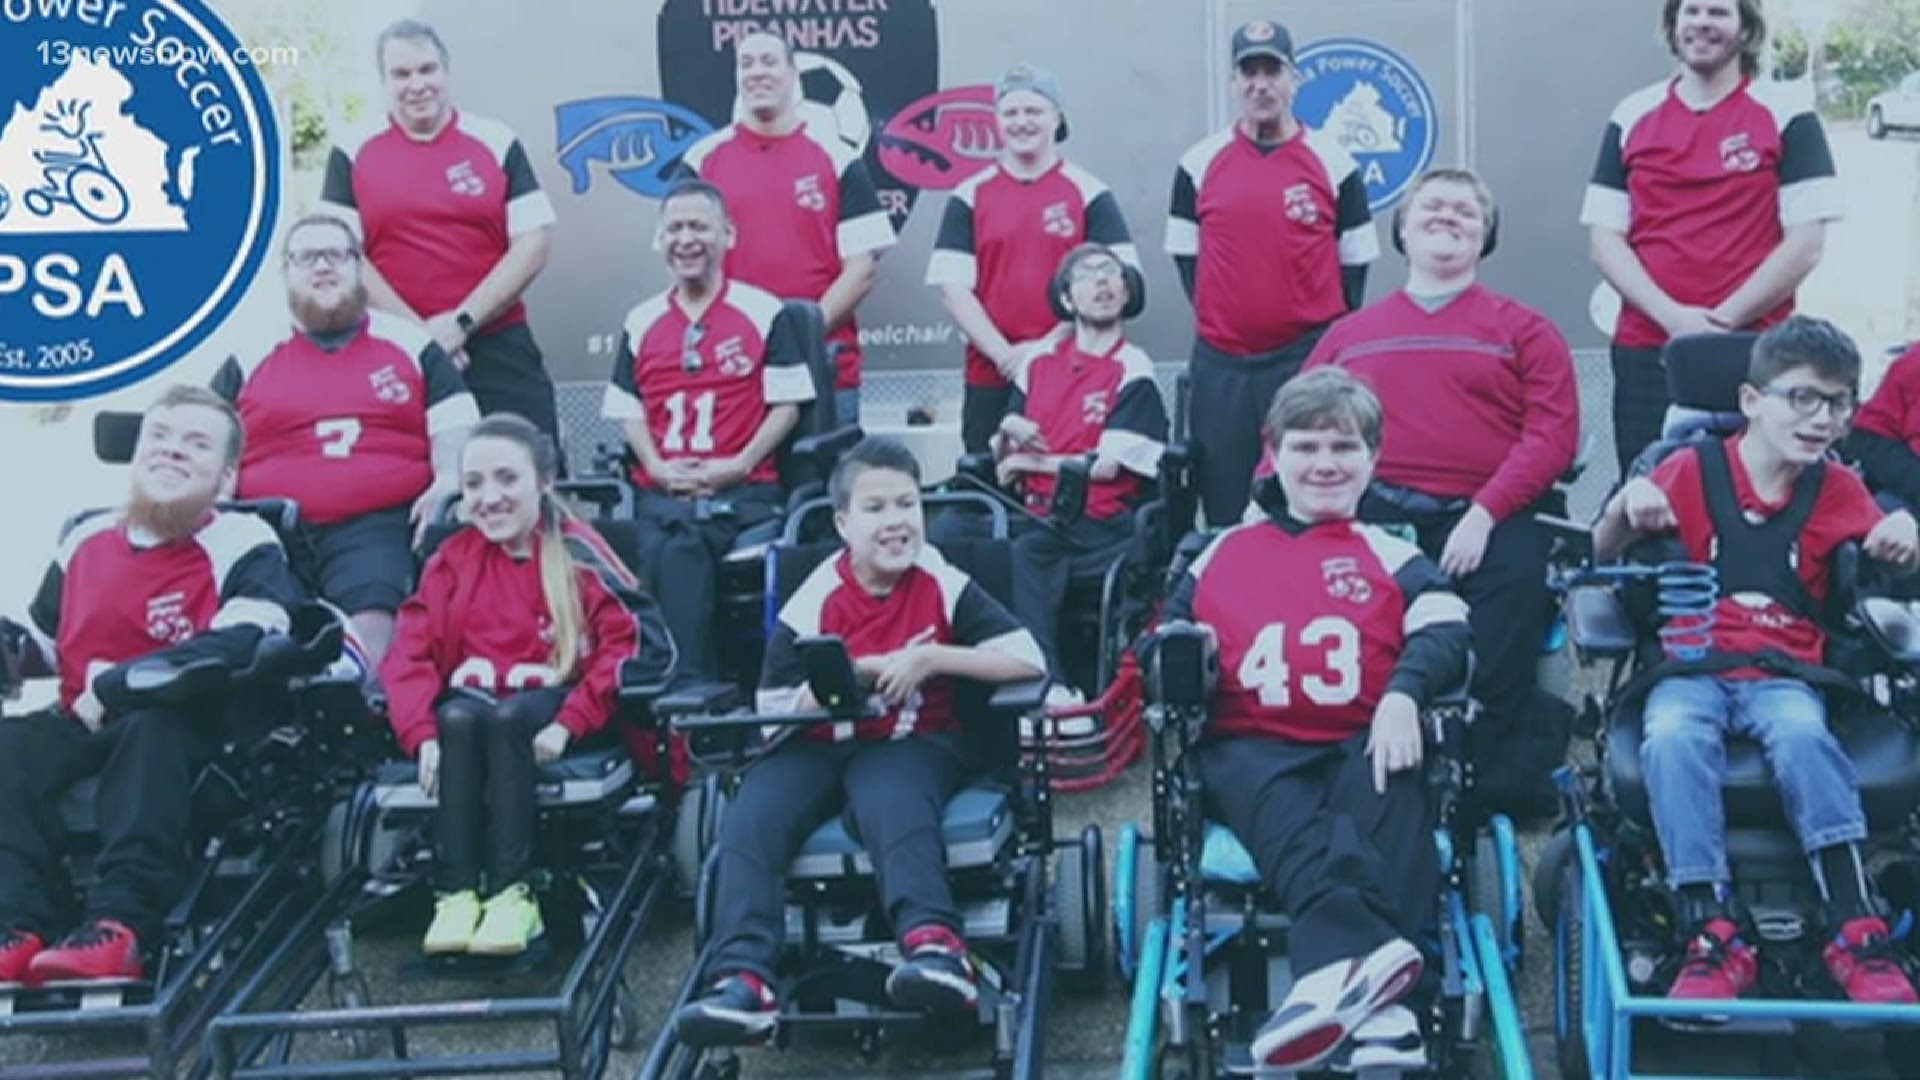 Since 2005, the Virginia Power Soccer Association has developed, supported and encouraged power wheelchair athletes across the state.